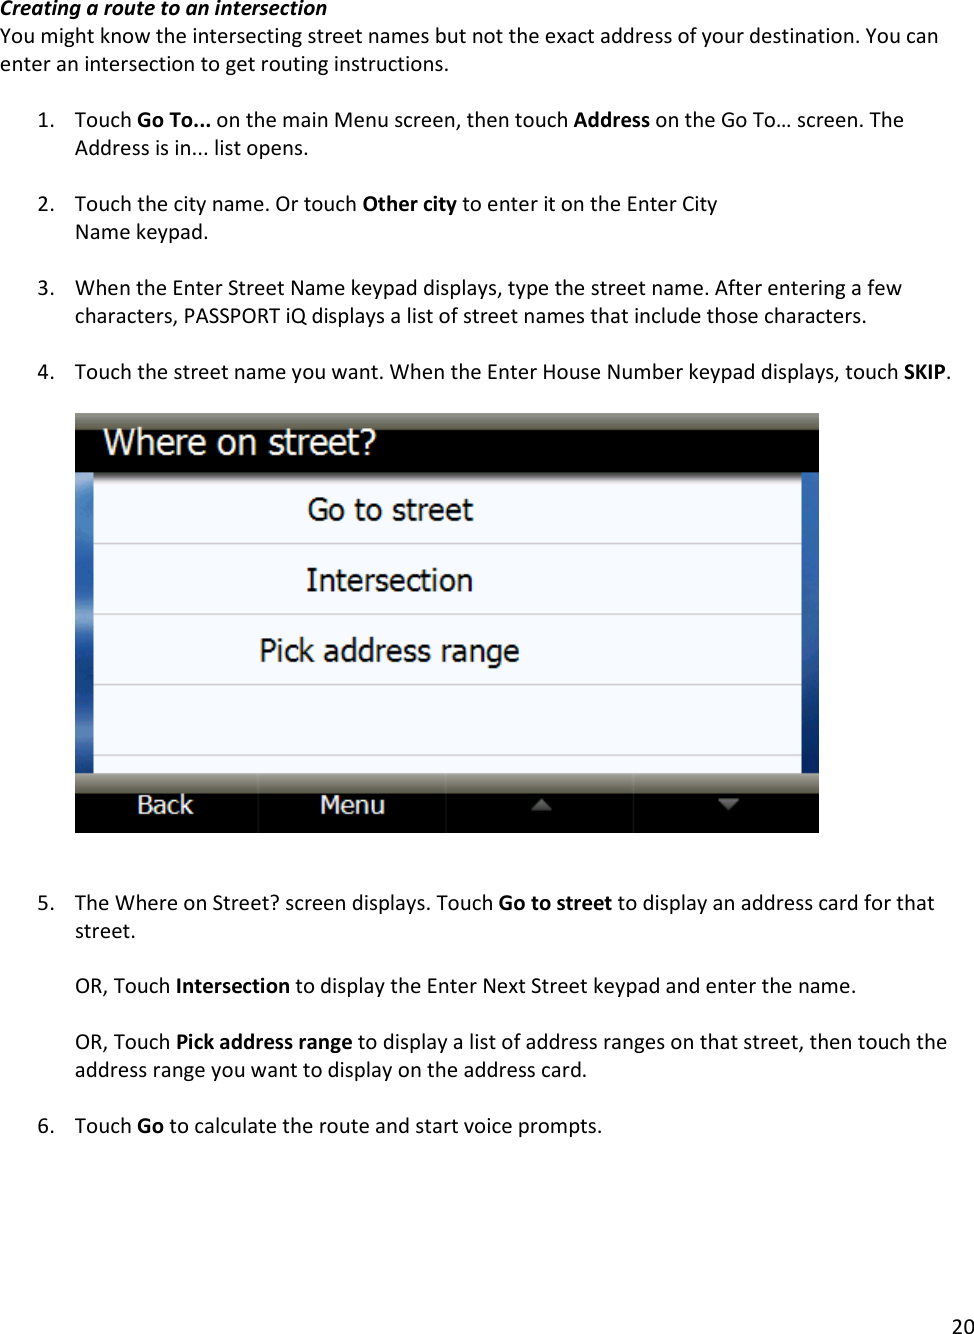 20  Creating a route to an intersection You might know the intersecting street names but not the exact address of your destination. You can enter an intersection to get routing instructions.   1. Touch Go To... on the main Menu screen, then touch Address on the Go To… screen. The Address is in... list opens.  2. Touch the city name. Or touch Other city to enter it on the Enter City Name keypad.  3. When the Enter Street Name keypad displays, type the street name. After entering a few characters, PASSPORT iQ displays a list of street names that include those characters.  4. Touch the street name you want. When the Enter House Number keypad displays, touch SKIP.        5. The Where on Street? screen displays. Touch Go to street to display an address card for that street.   OR, Touch Intersection to display the Enter Next Street keypad and enter the name.  OR, Touch Pick address range to display a list of address ranges on that street, then touch the address range you want to display on the address card.   6. Touch Go to calculate the route and start voice prompts.   